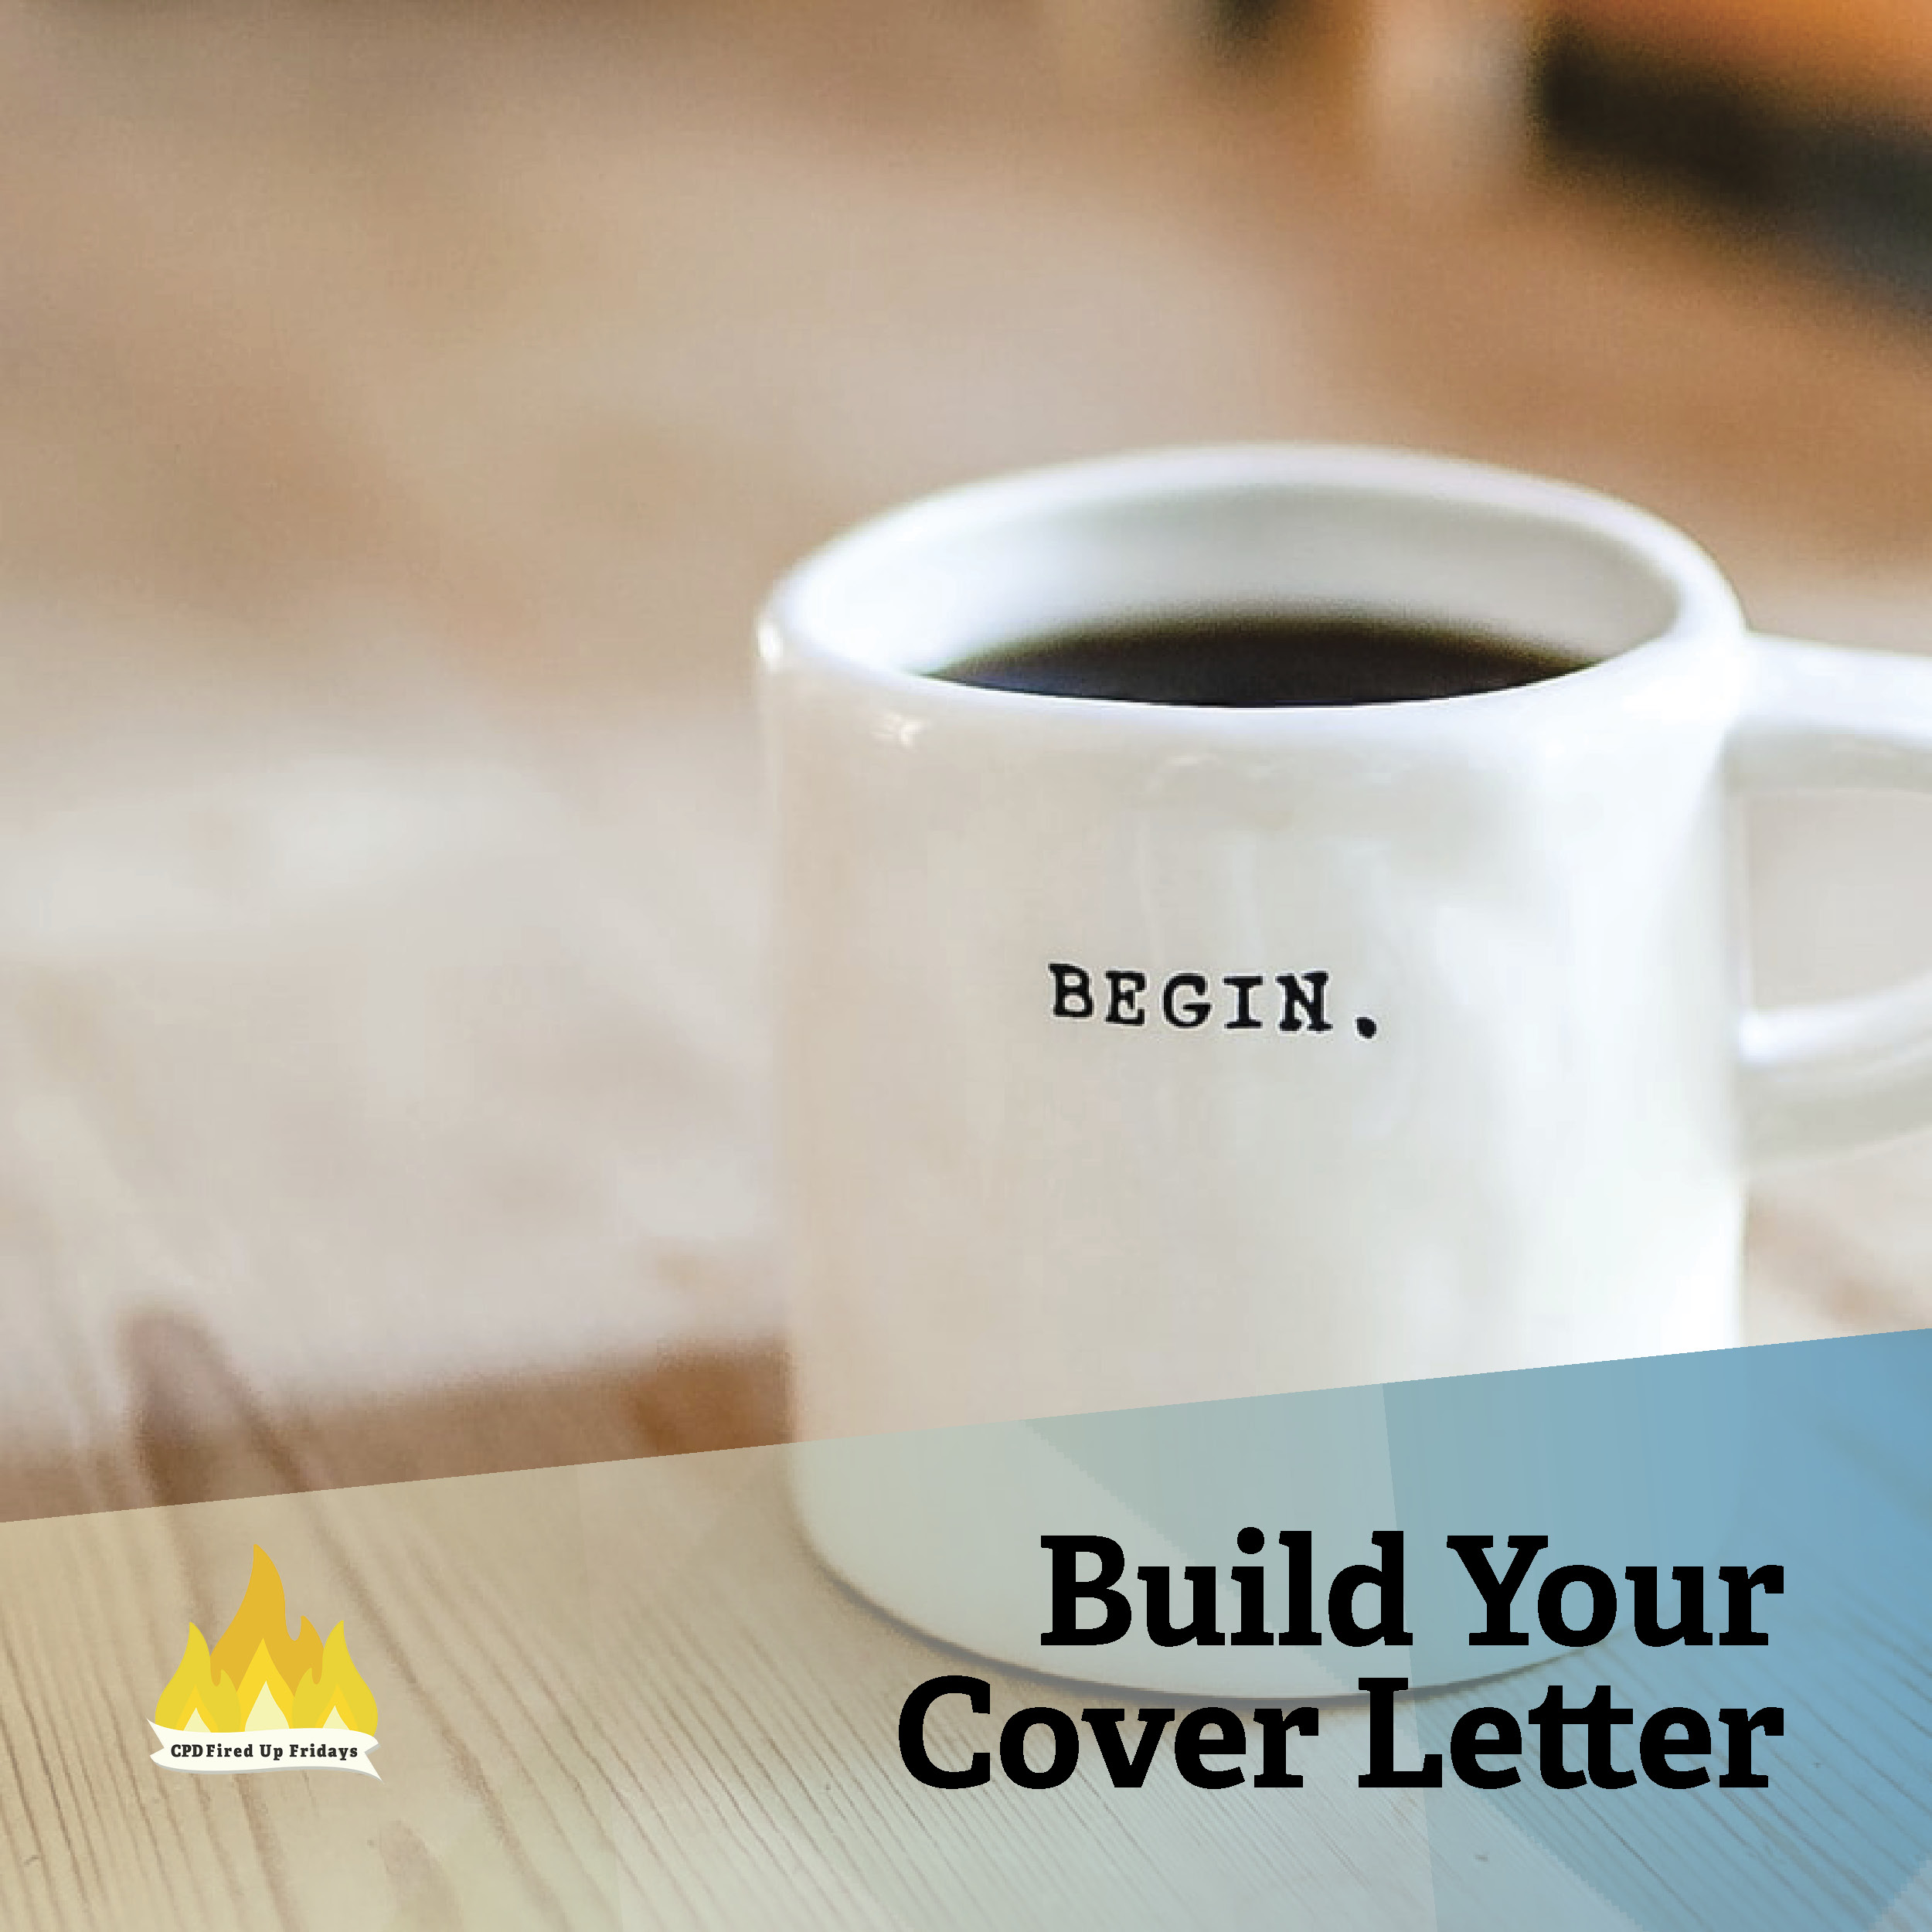 A white mug sits on a pale wood table. It is full of fresh black coffee, and written on the side of the cup in small, simple black letter is the word 'begin.' Underneath the image, text reads: 'Build Your Cover Letter.'